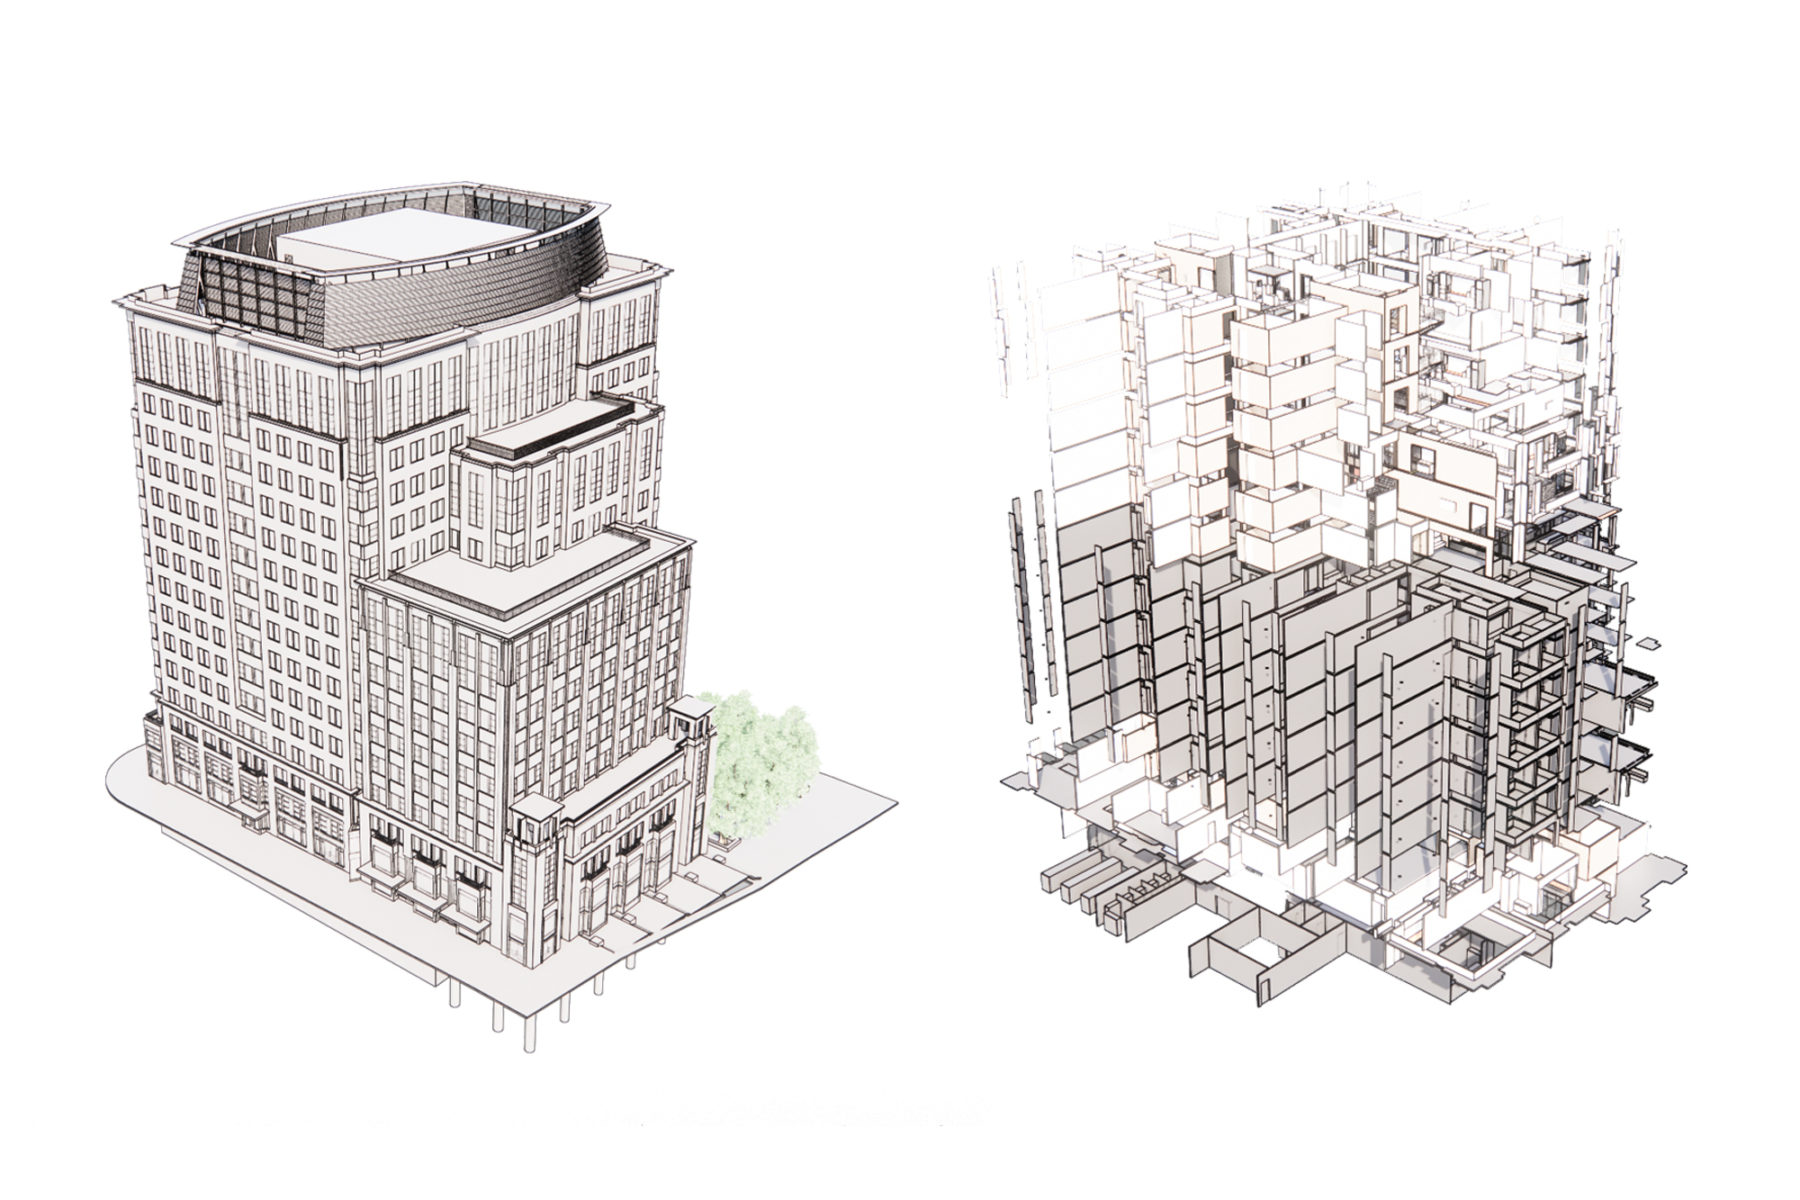 two renderings of a building model - one of the building's exterior, and one of its interior